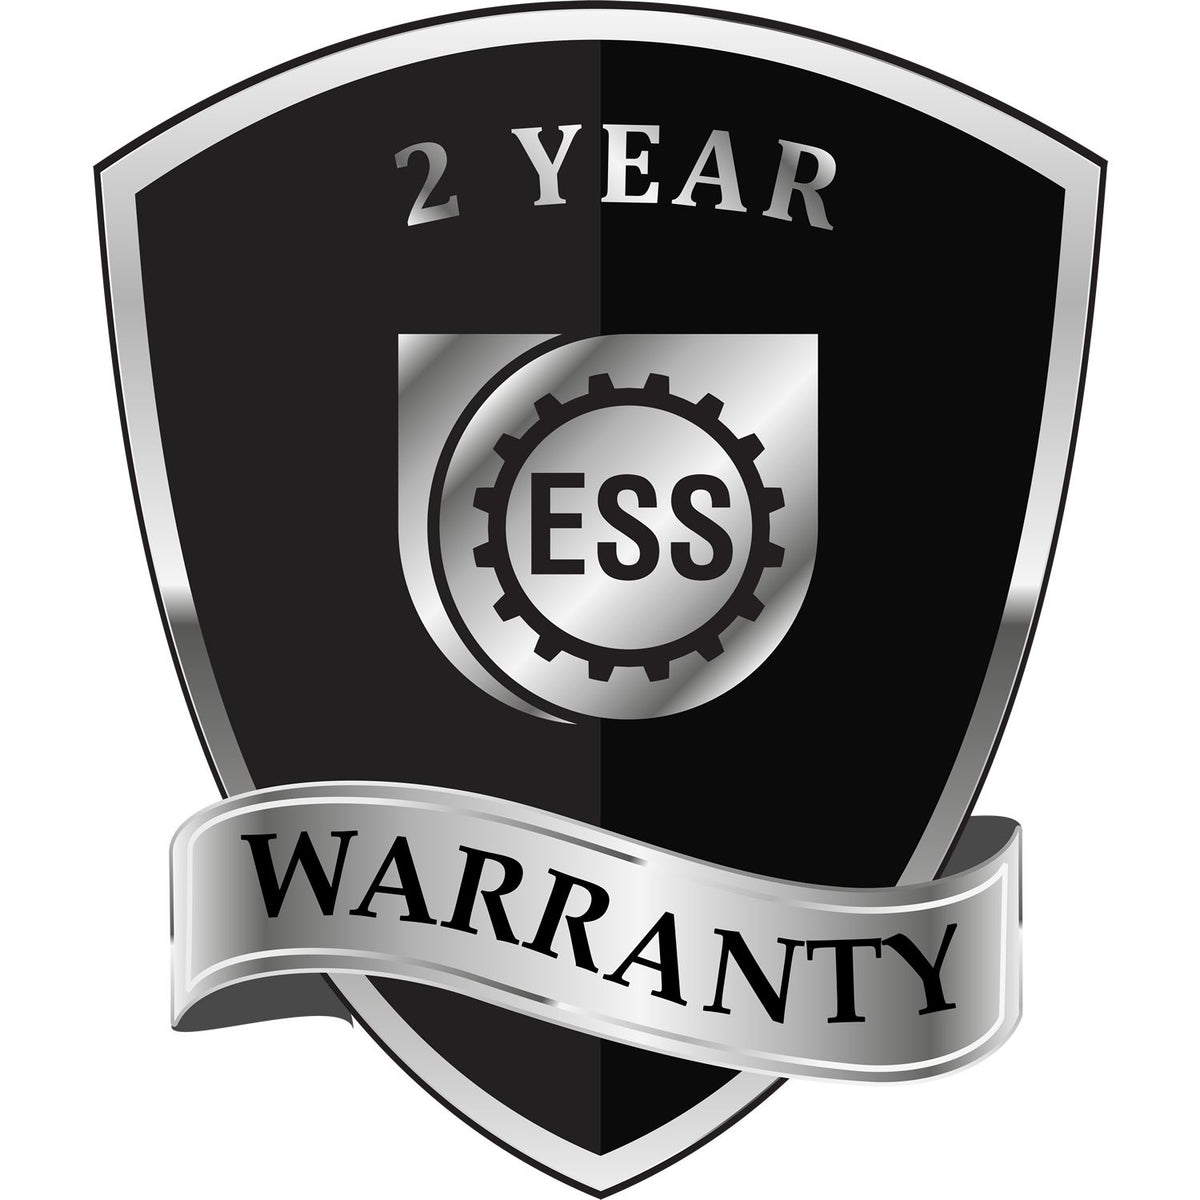 A badge or emblem showing a warranty icon for the Heavy Duty Cast Iron Iowa Land Surveyor Seal Embosser